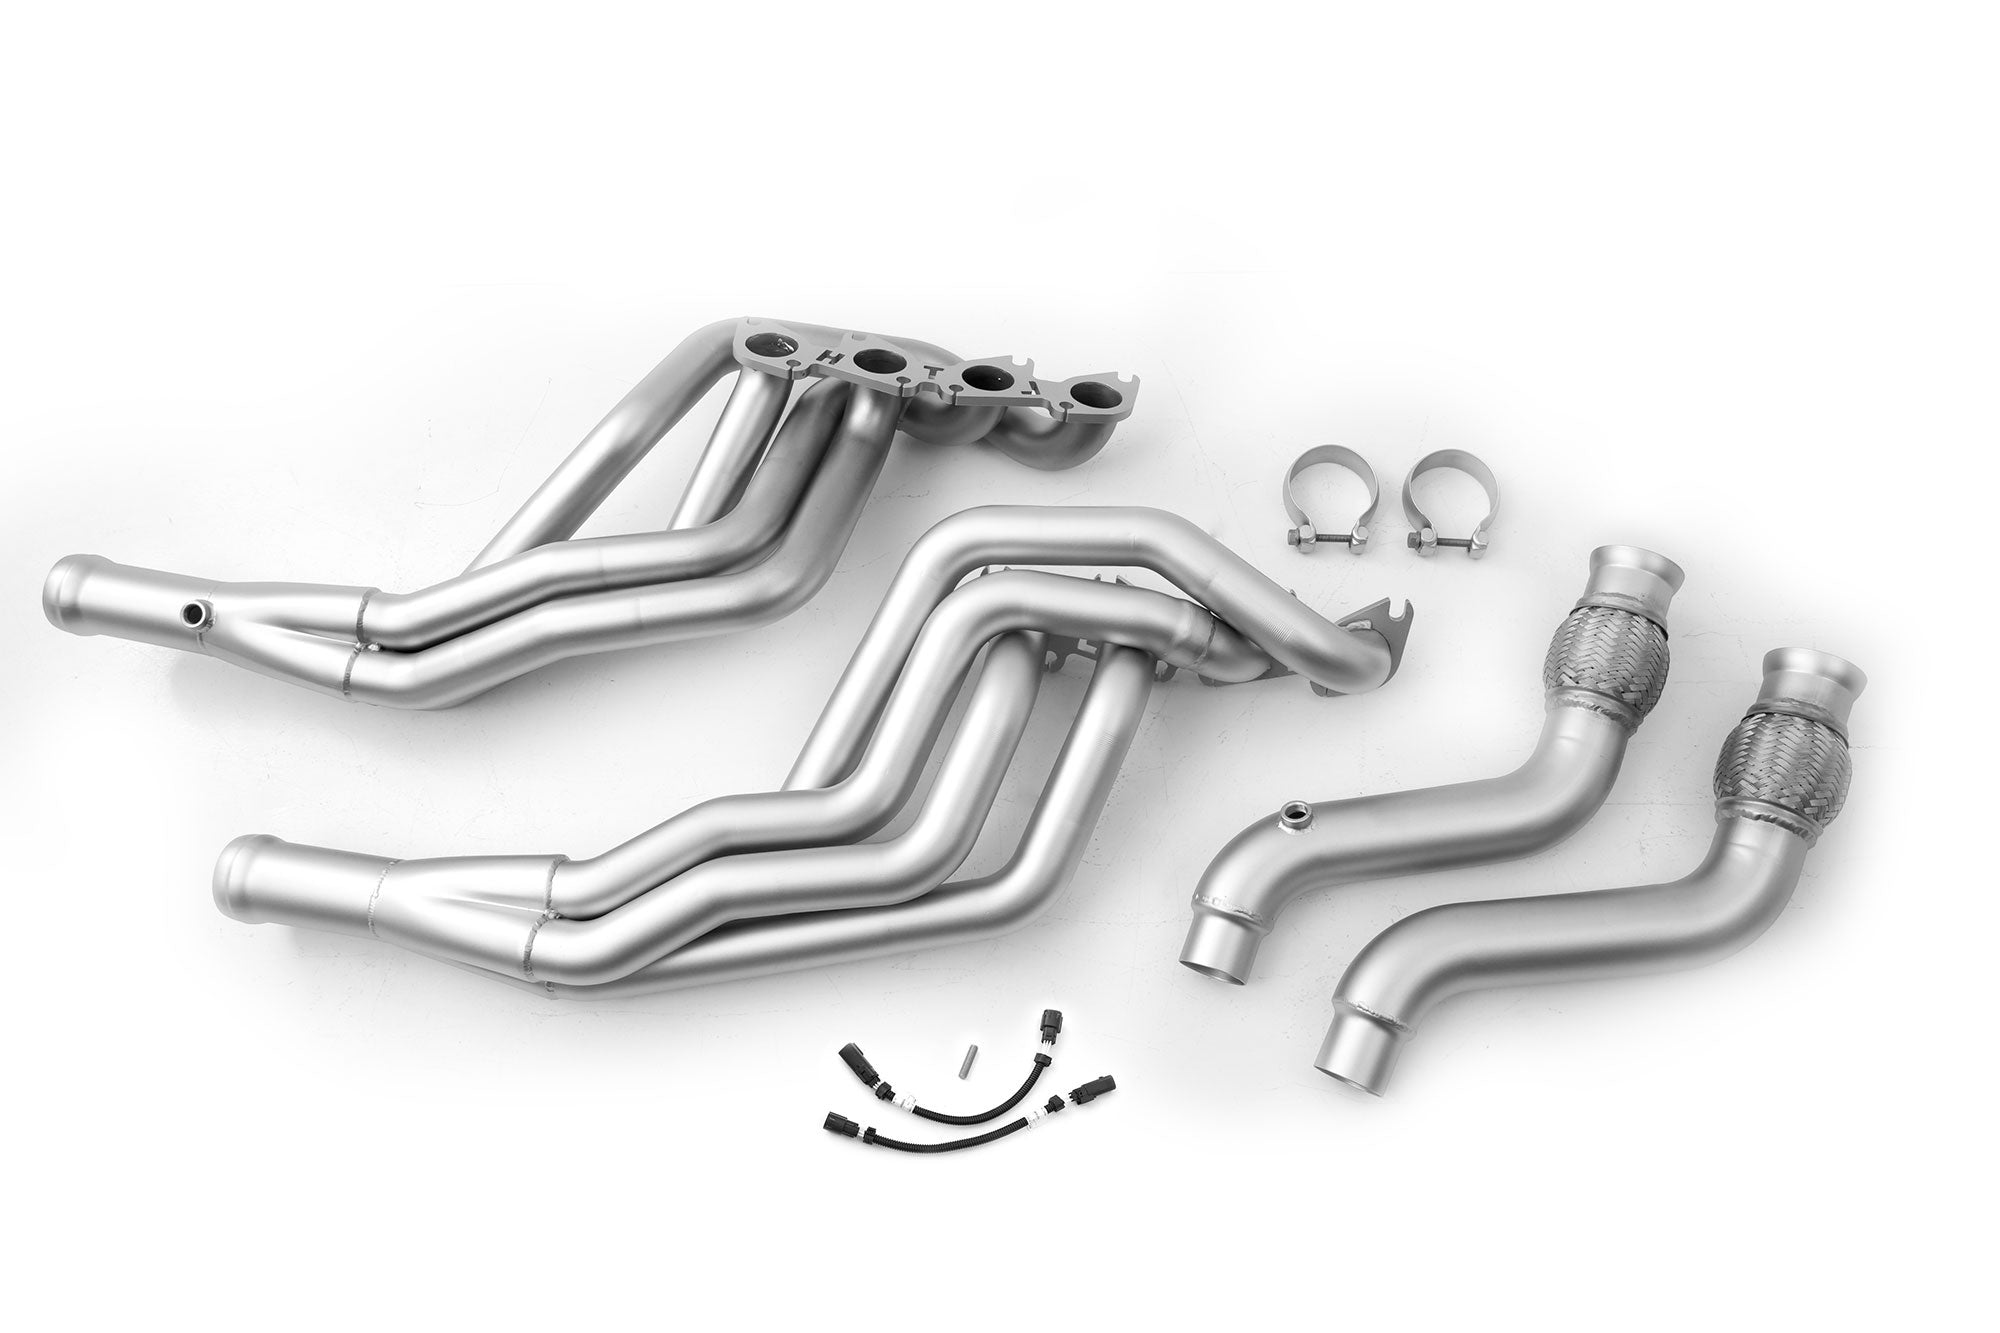 LTH S550 Mustang Tube Long Headers - Chat / Décat (2015-23)